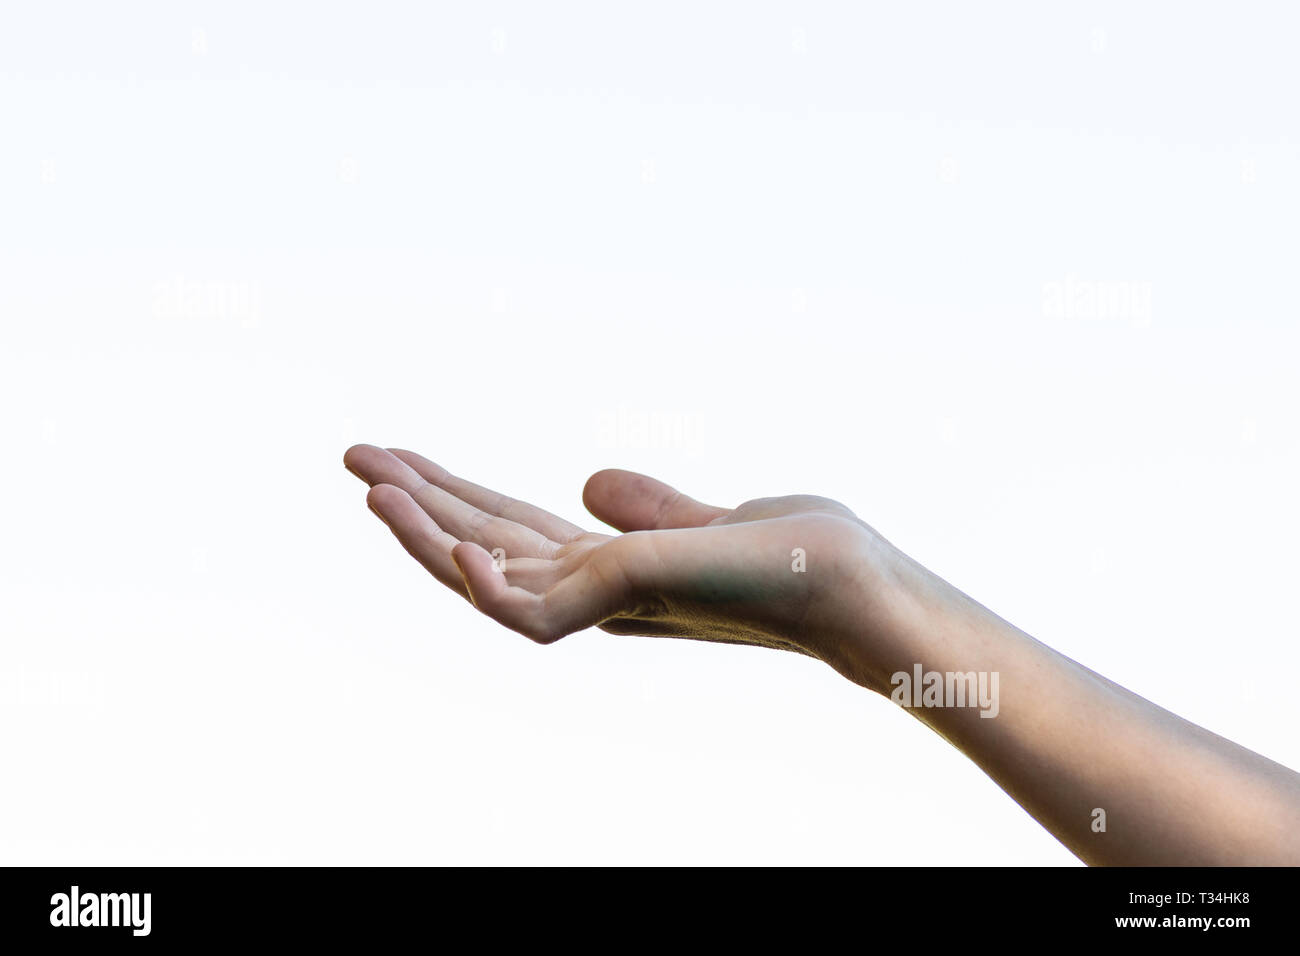 Hand reaching out against white background Stock Photo